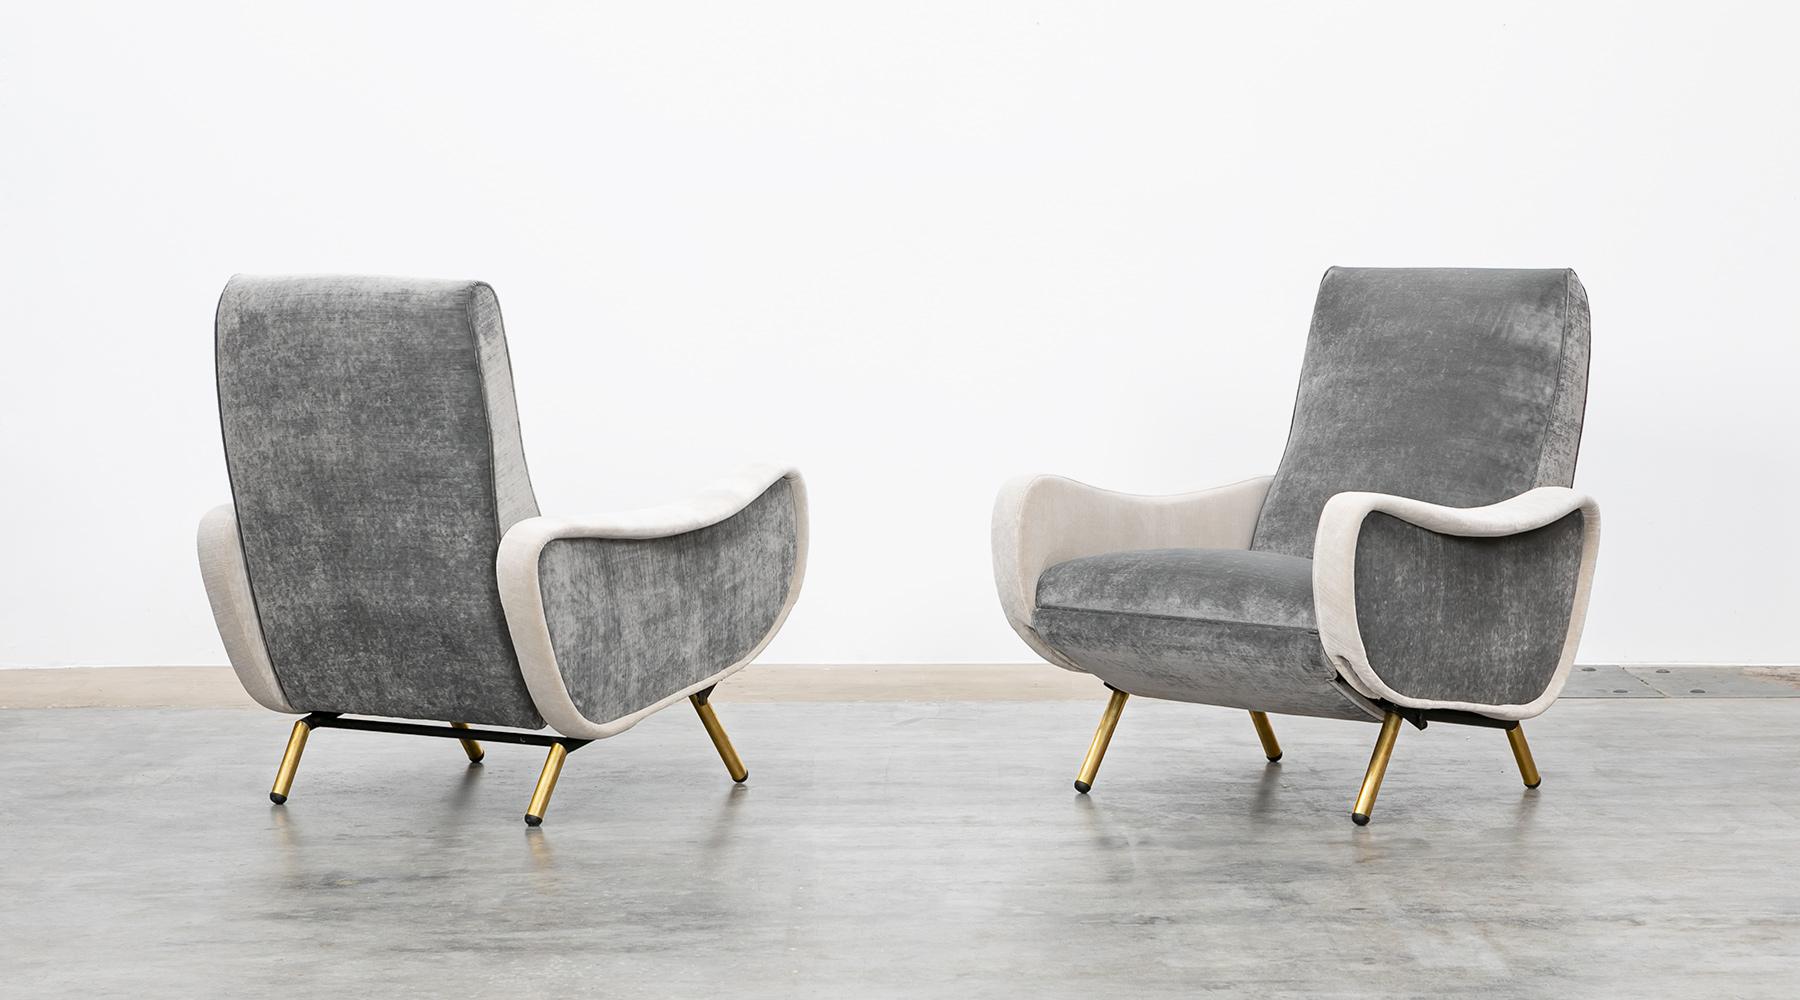 This beautiful couple of lounge chairs designed by Marco Zanuso comes on four brass legs. The seat and the back of the chairs are covered with two different tones in grey and high-quality fabric.
The chairs provide exquisitely comfortable seating